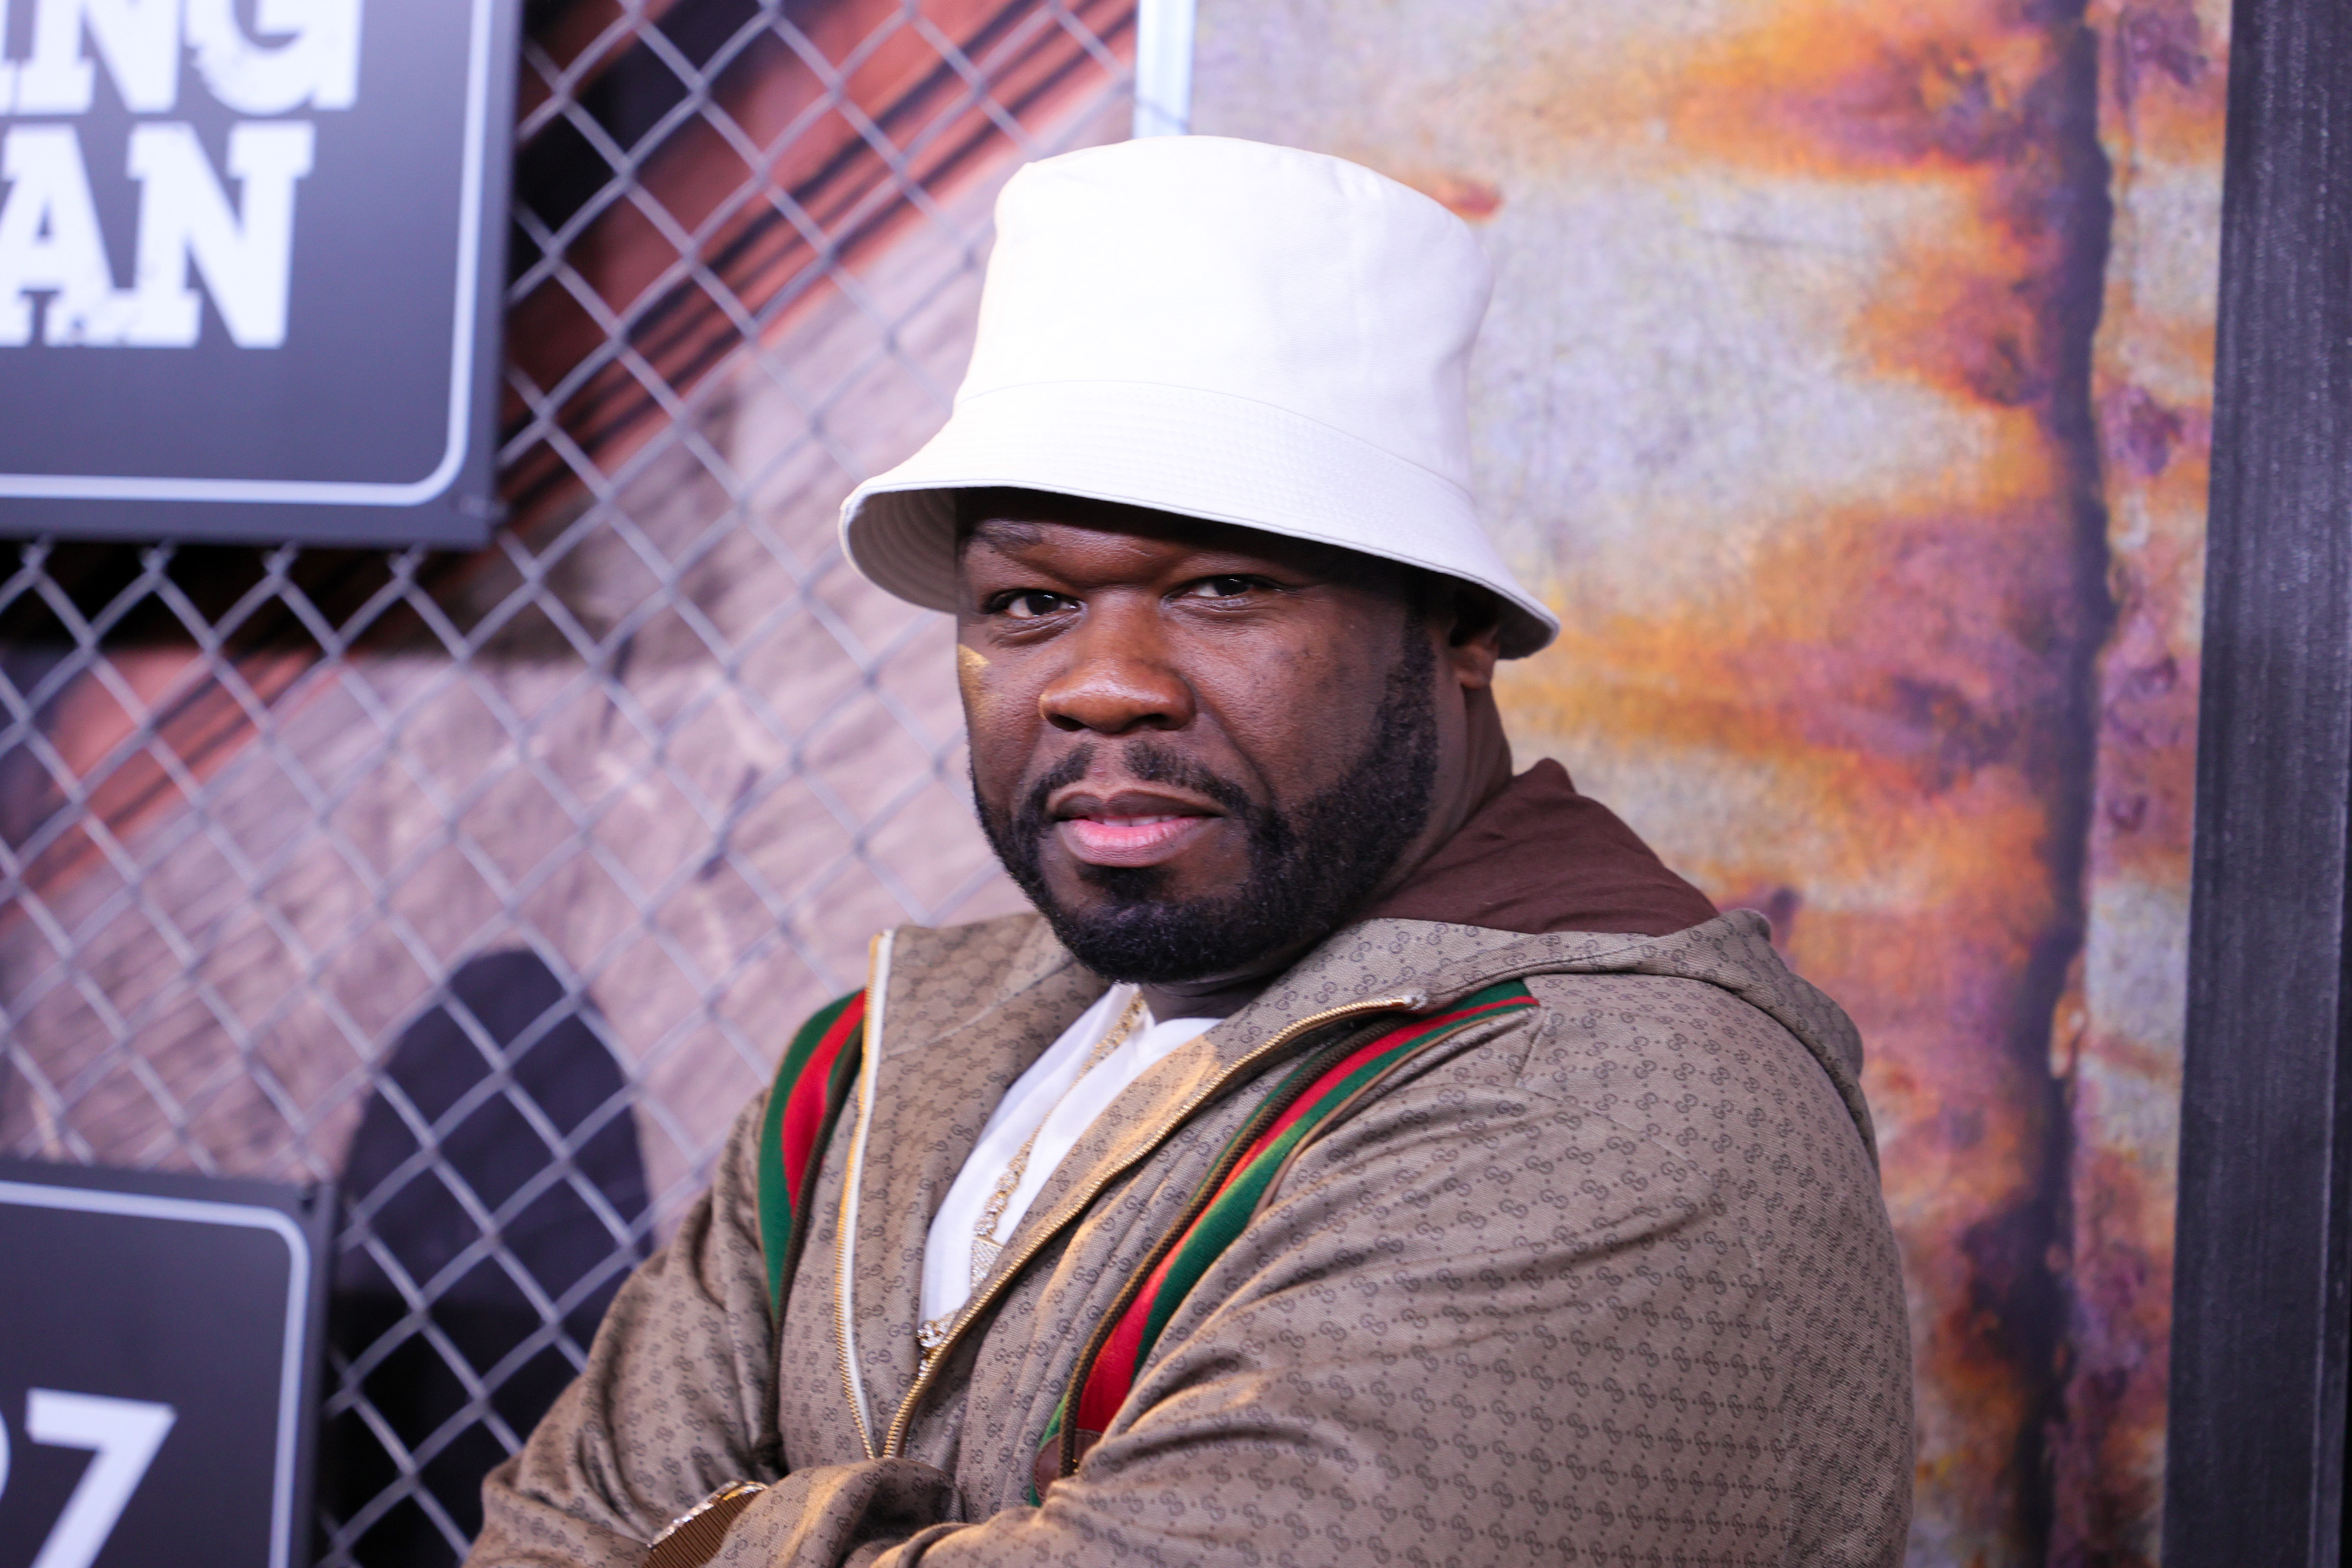 50 Cent Disses Maison Margiela Tabi Sneakers: “I Don’t Care Who Told You These Fly”